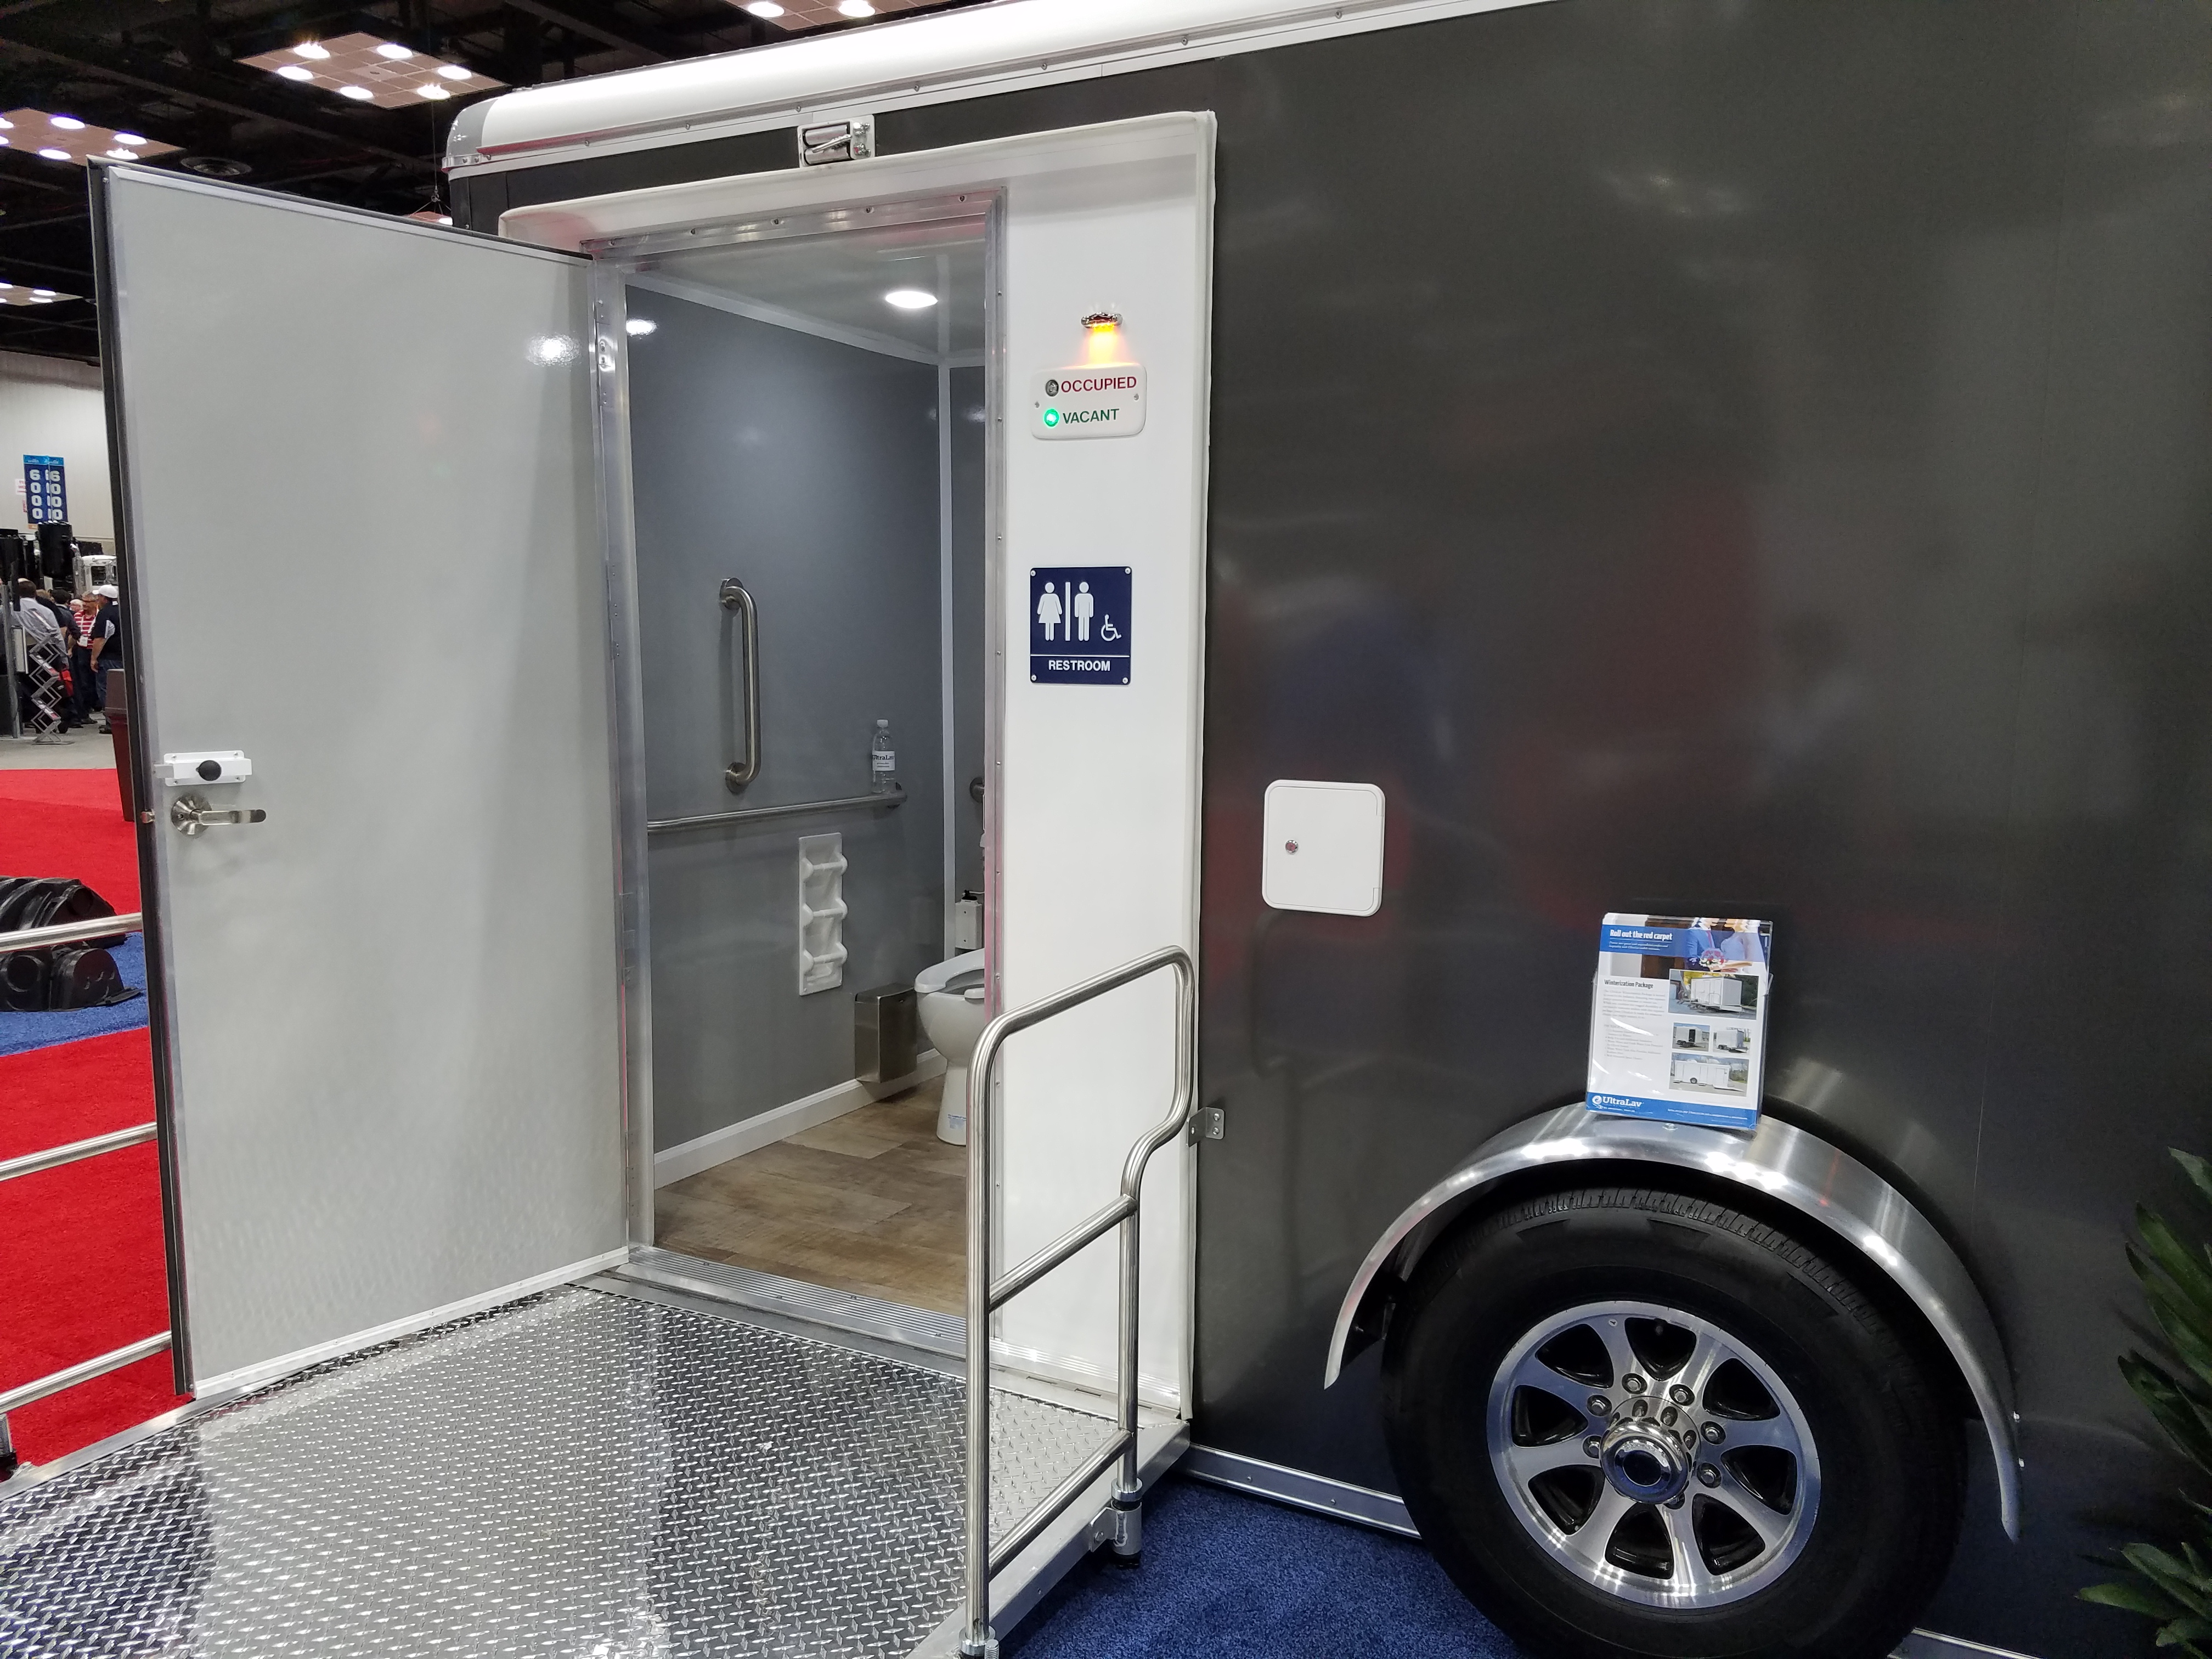 ADA Plus Two Station Vegas Restroom Trailer, Being Displayed at a Bridal Show, in Hartford CT 